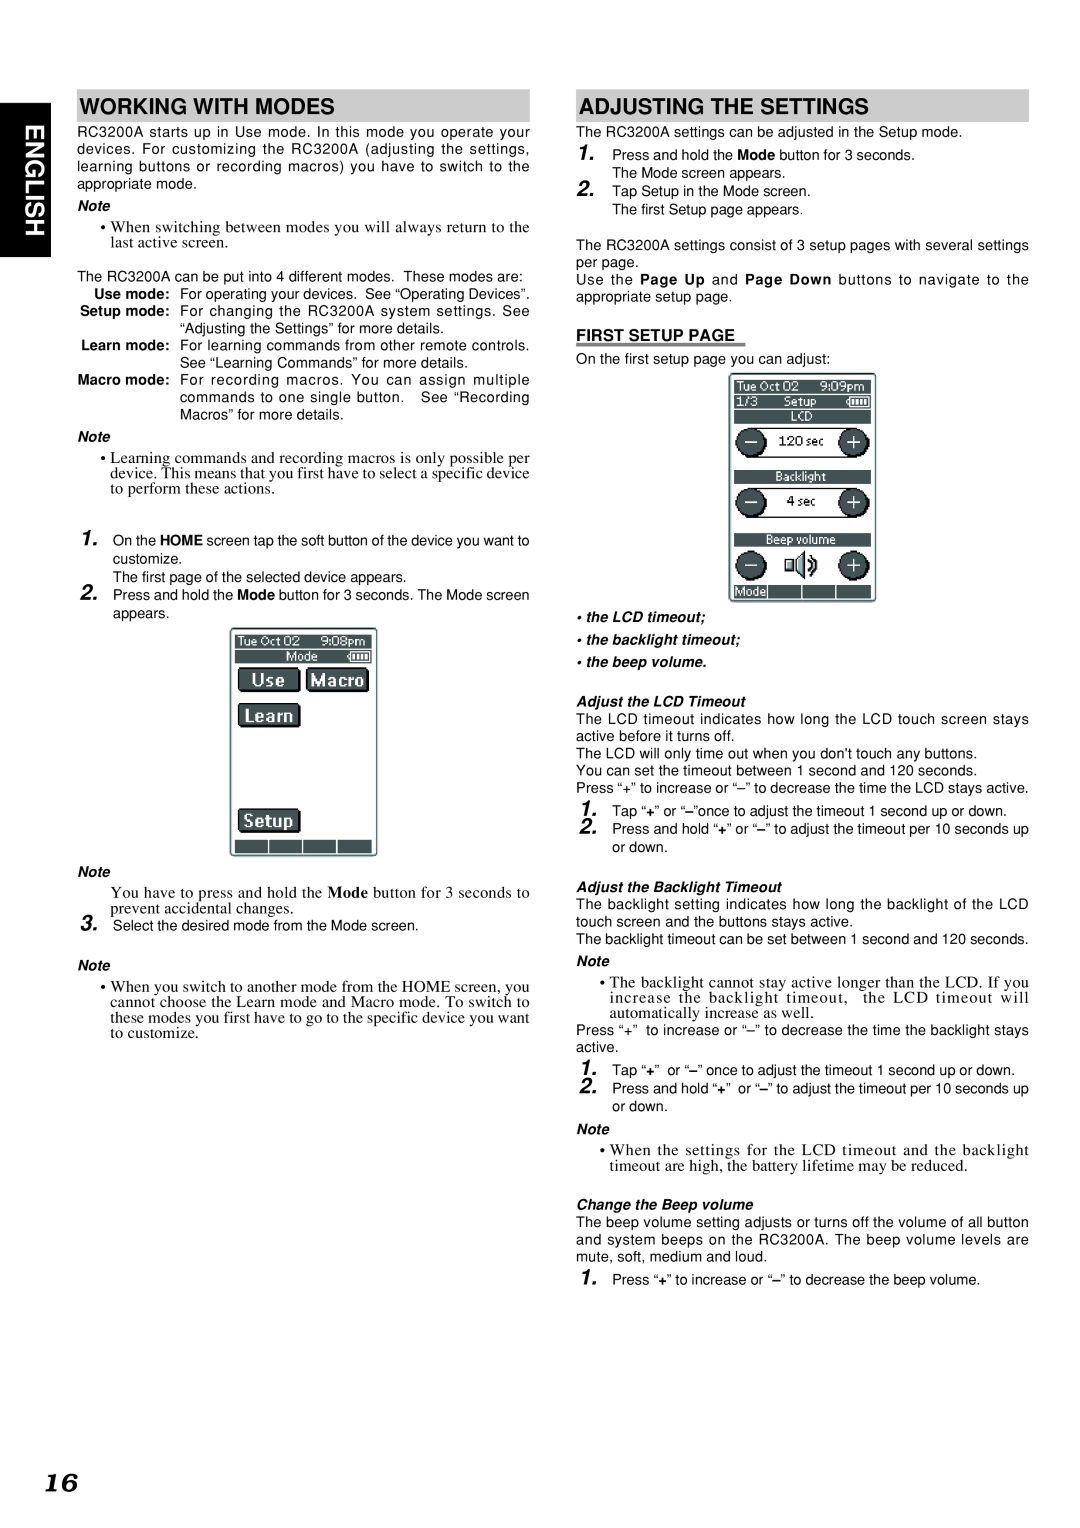 Marantz SR9300 manual English, Working With Modes, Adjusting The Settings, First Setup Page 